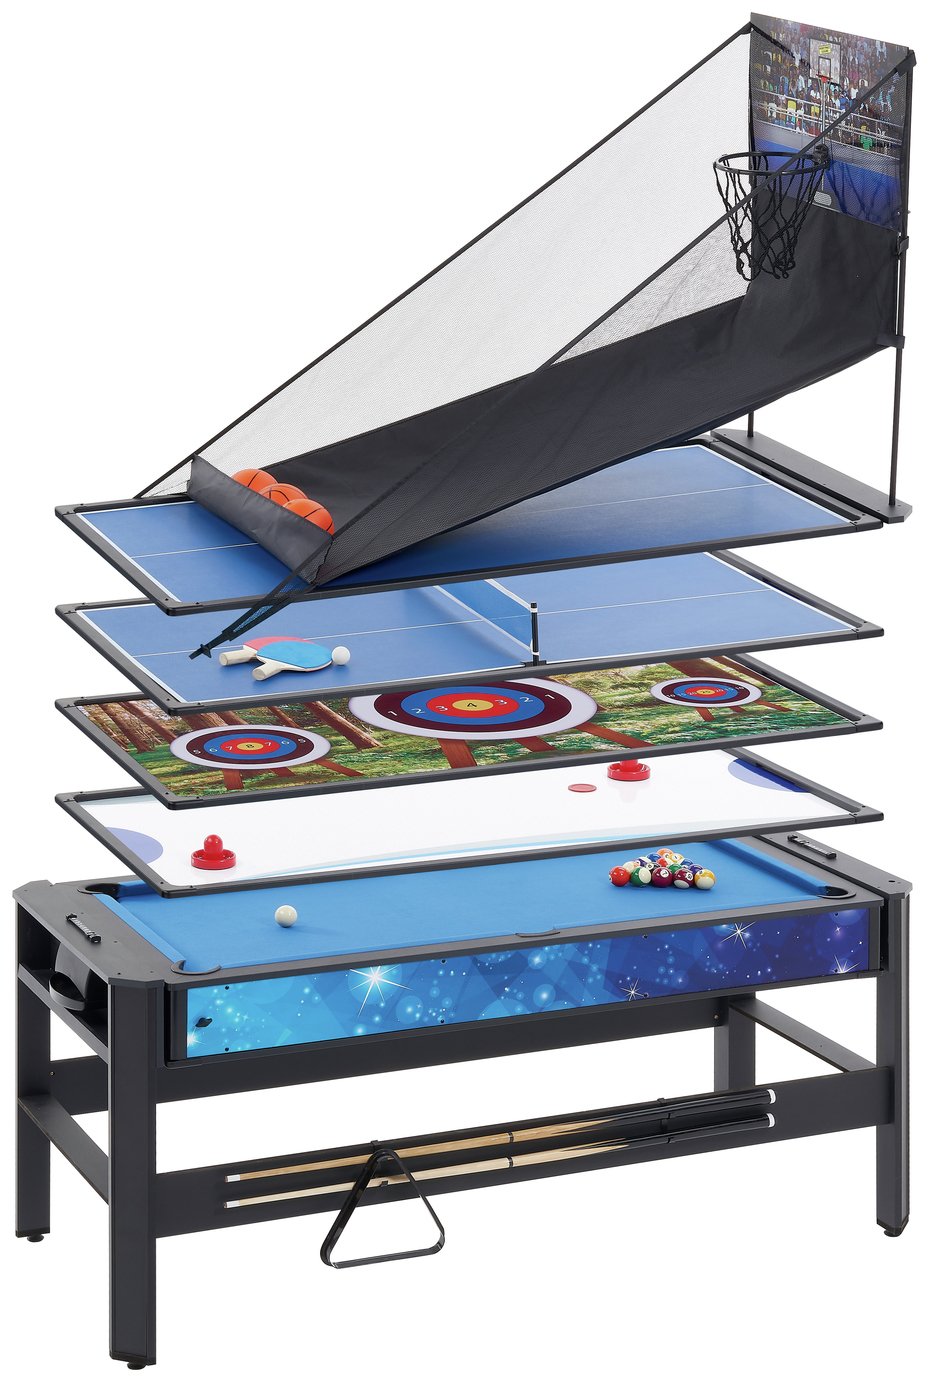 Mightymast 6ft Pentagon 5 in 1 Multigames Table Review